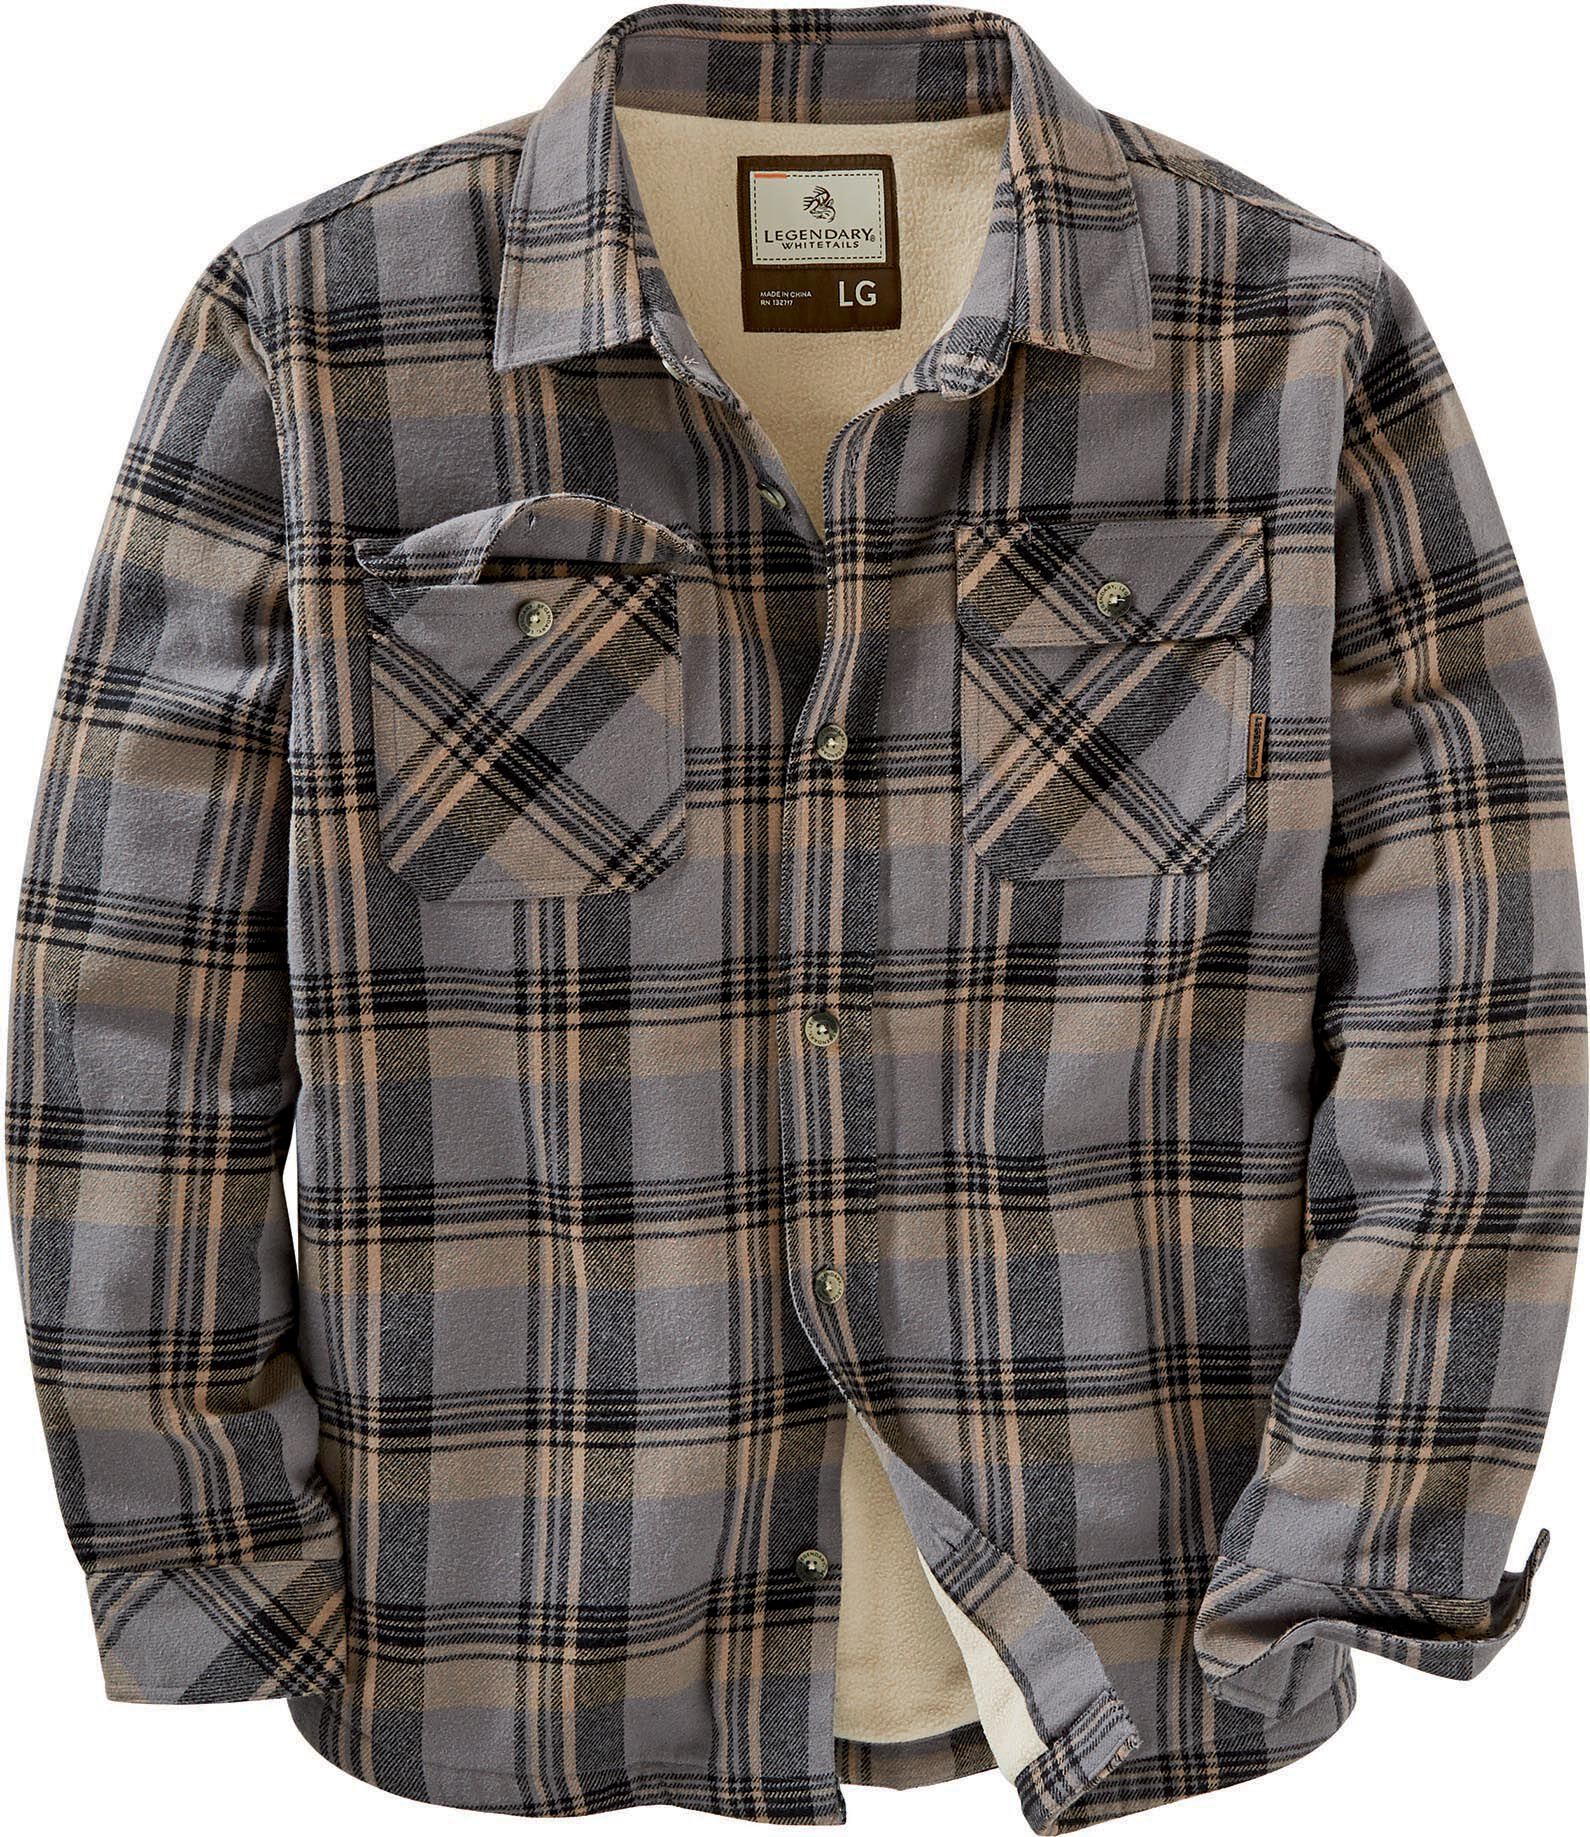 mens sherpa lined flannel jacket with hood